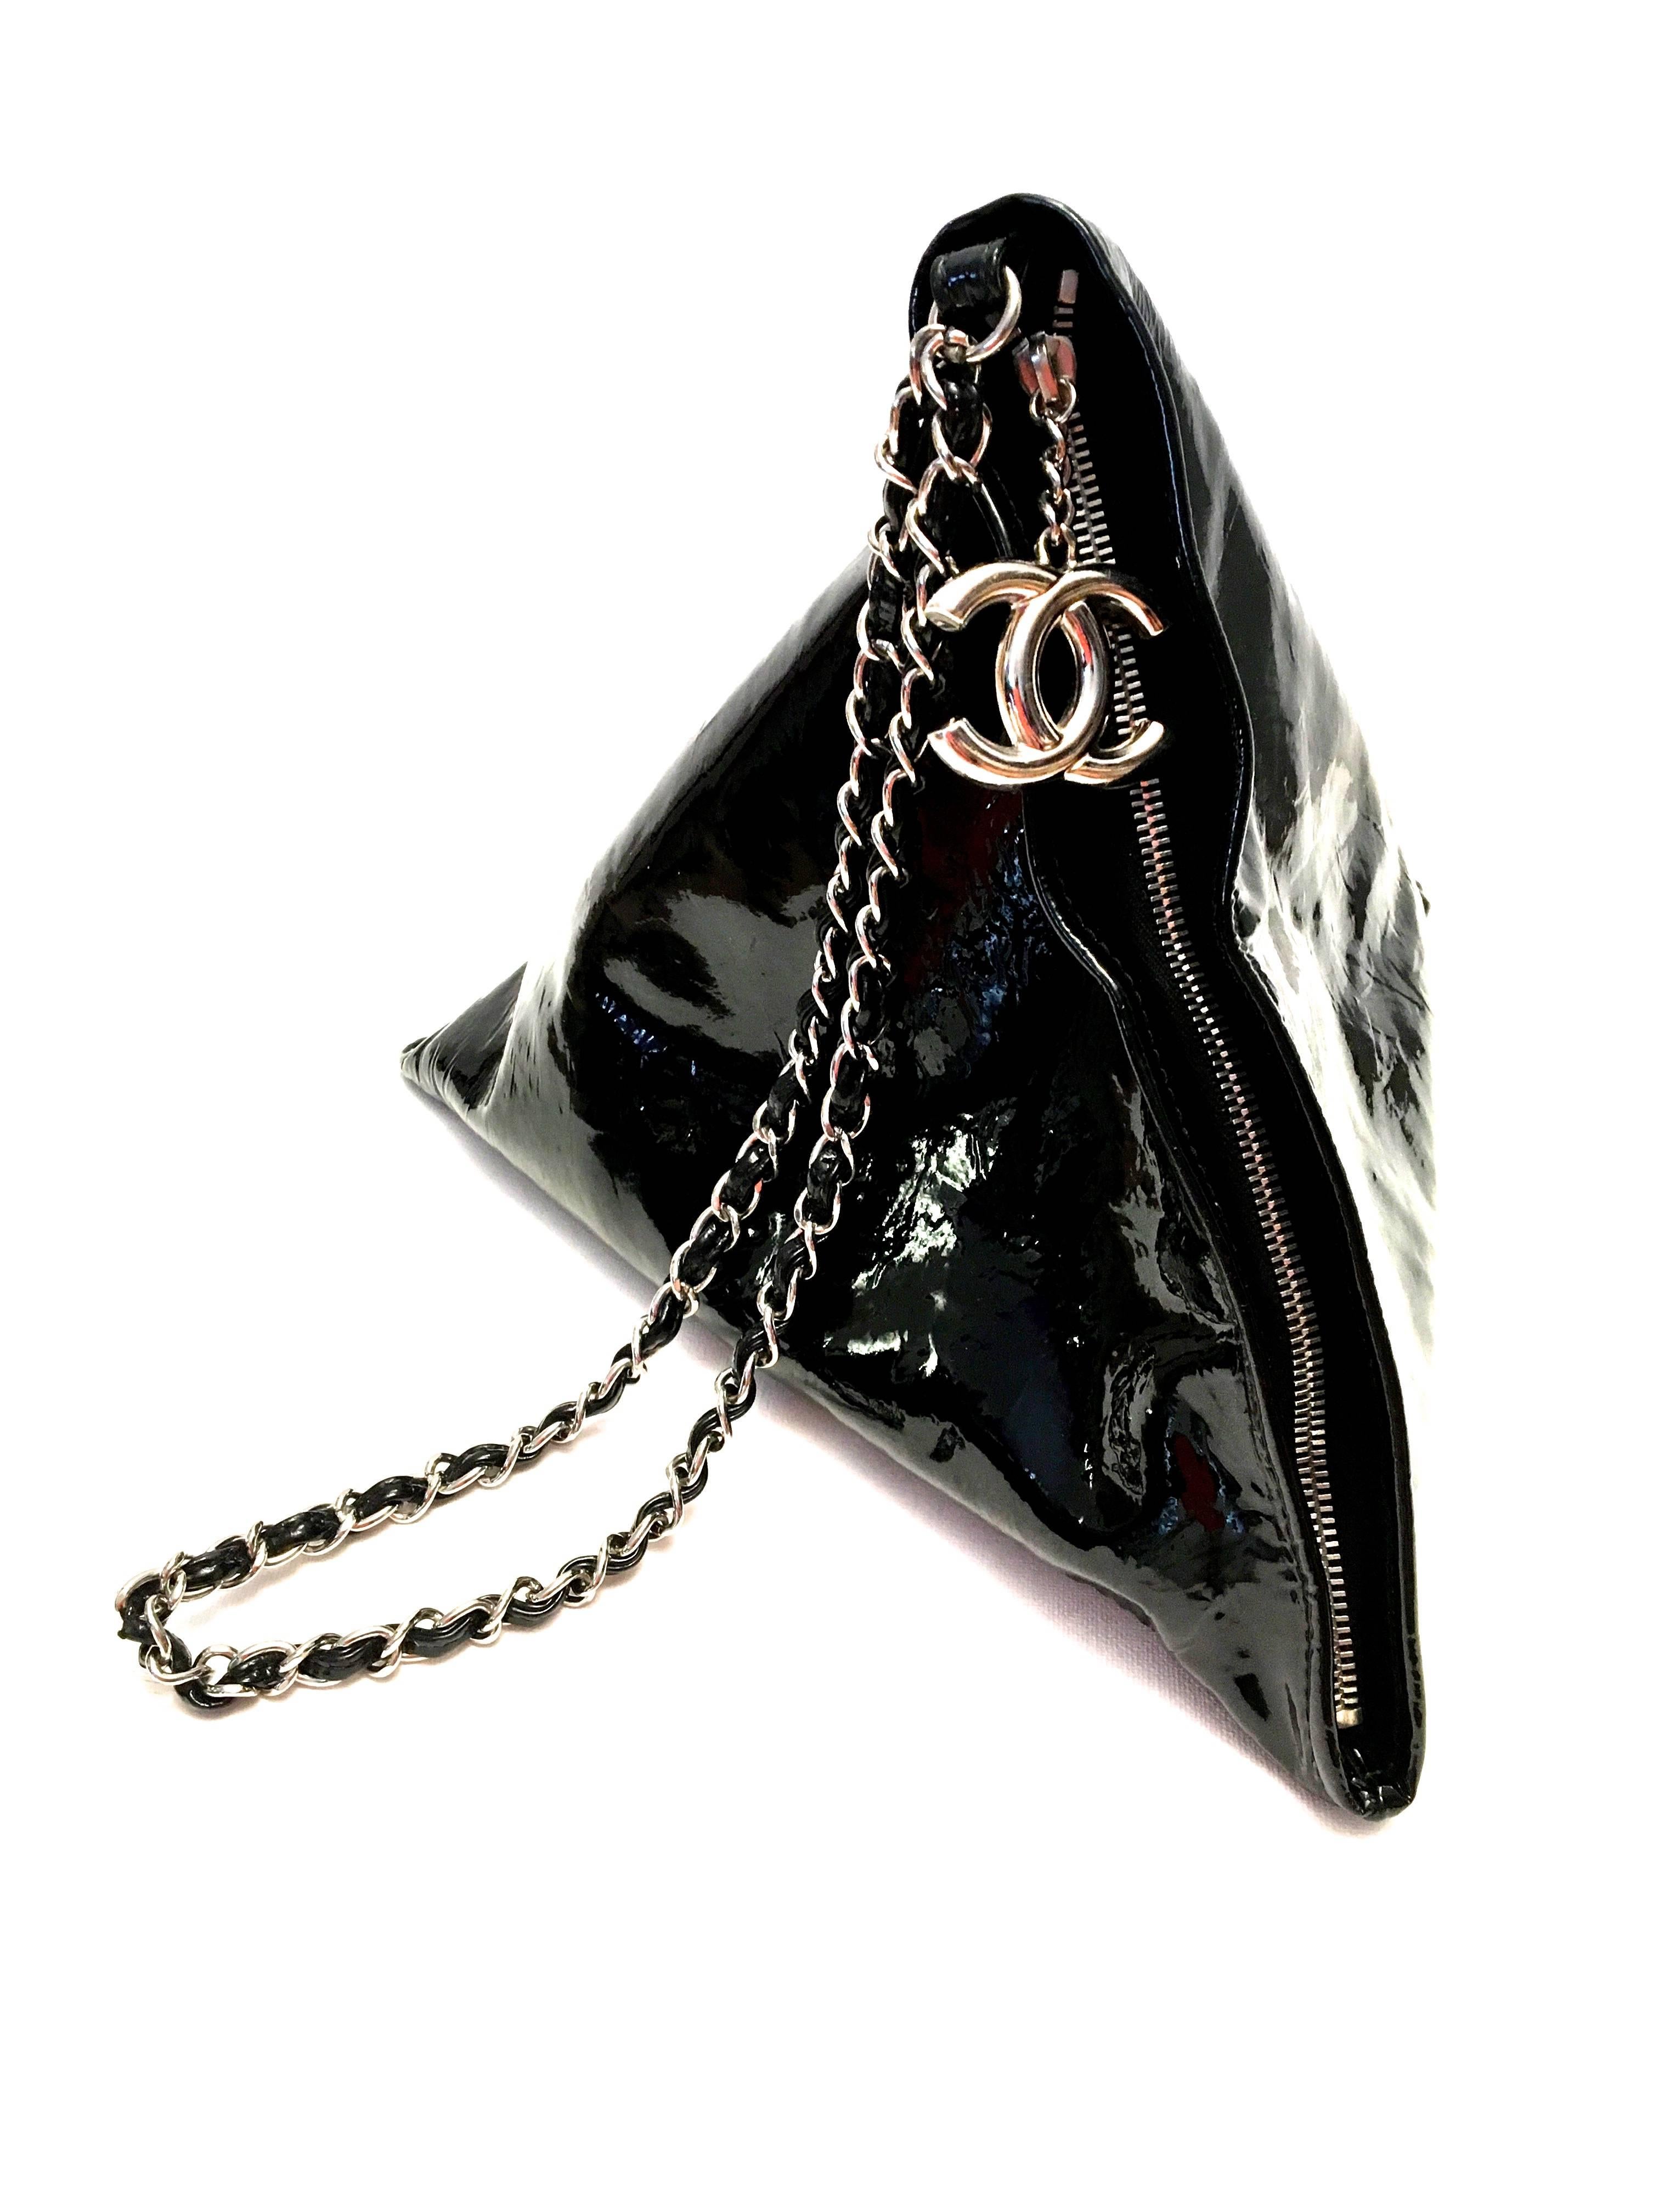 Presented here is a black triangular purse from the 1980's. The purse is a solid black on the exterior in a triangular pyramid design. The purse has a zipper on one of the edges of the pyramid so it can be very comfortably worn on the shoulder.  The